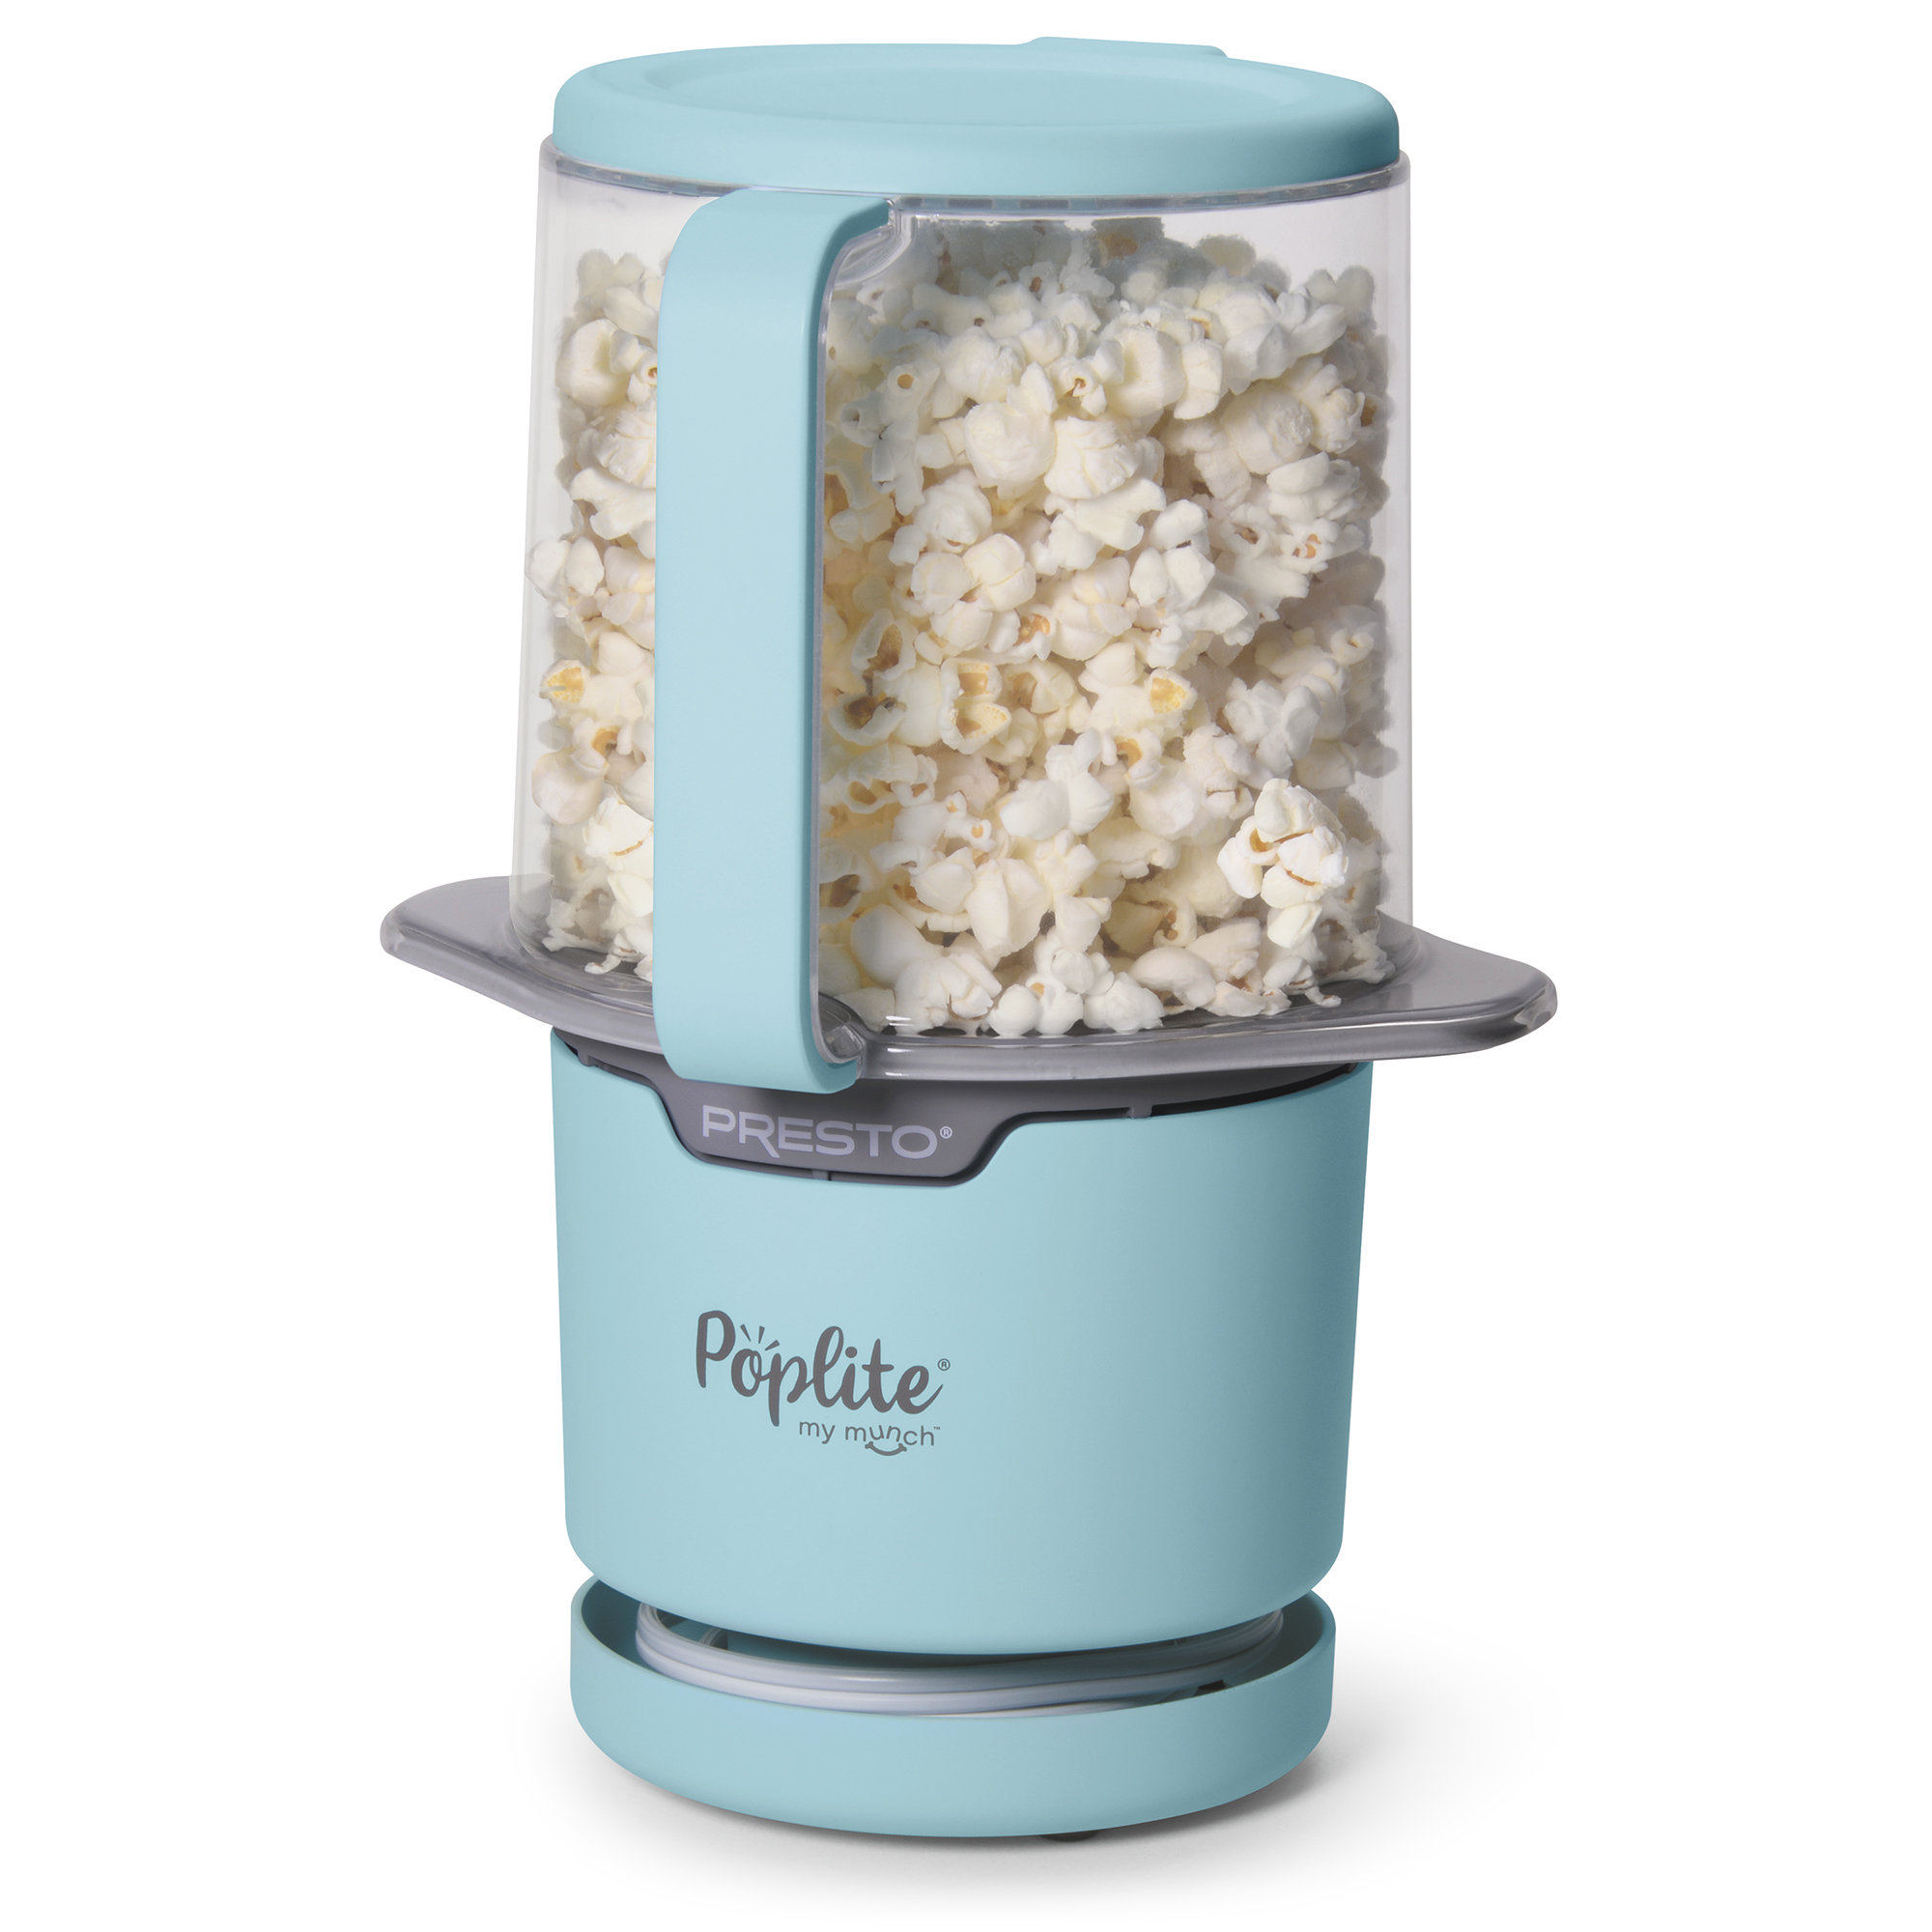 Presto Orville Redenbacher Hot Air Popper Review: Oil-free and